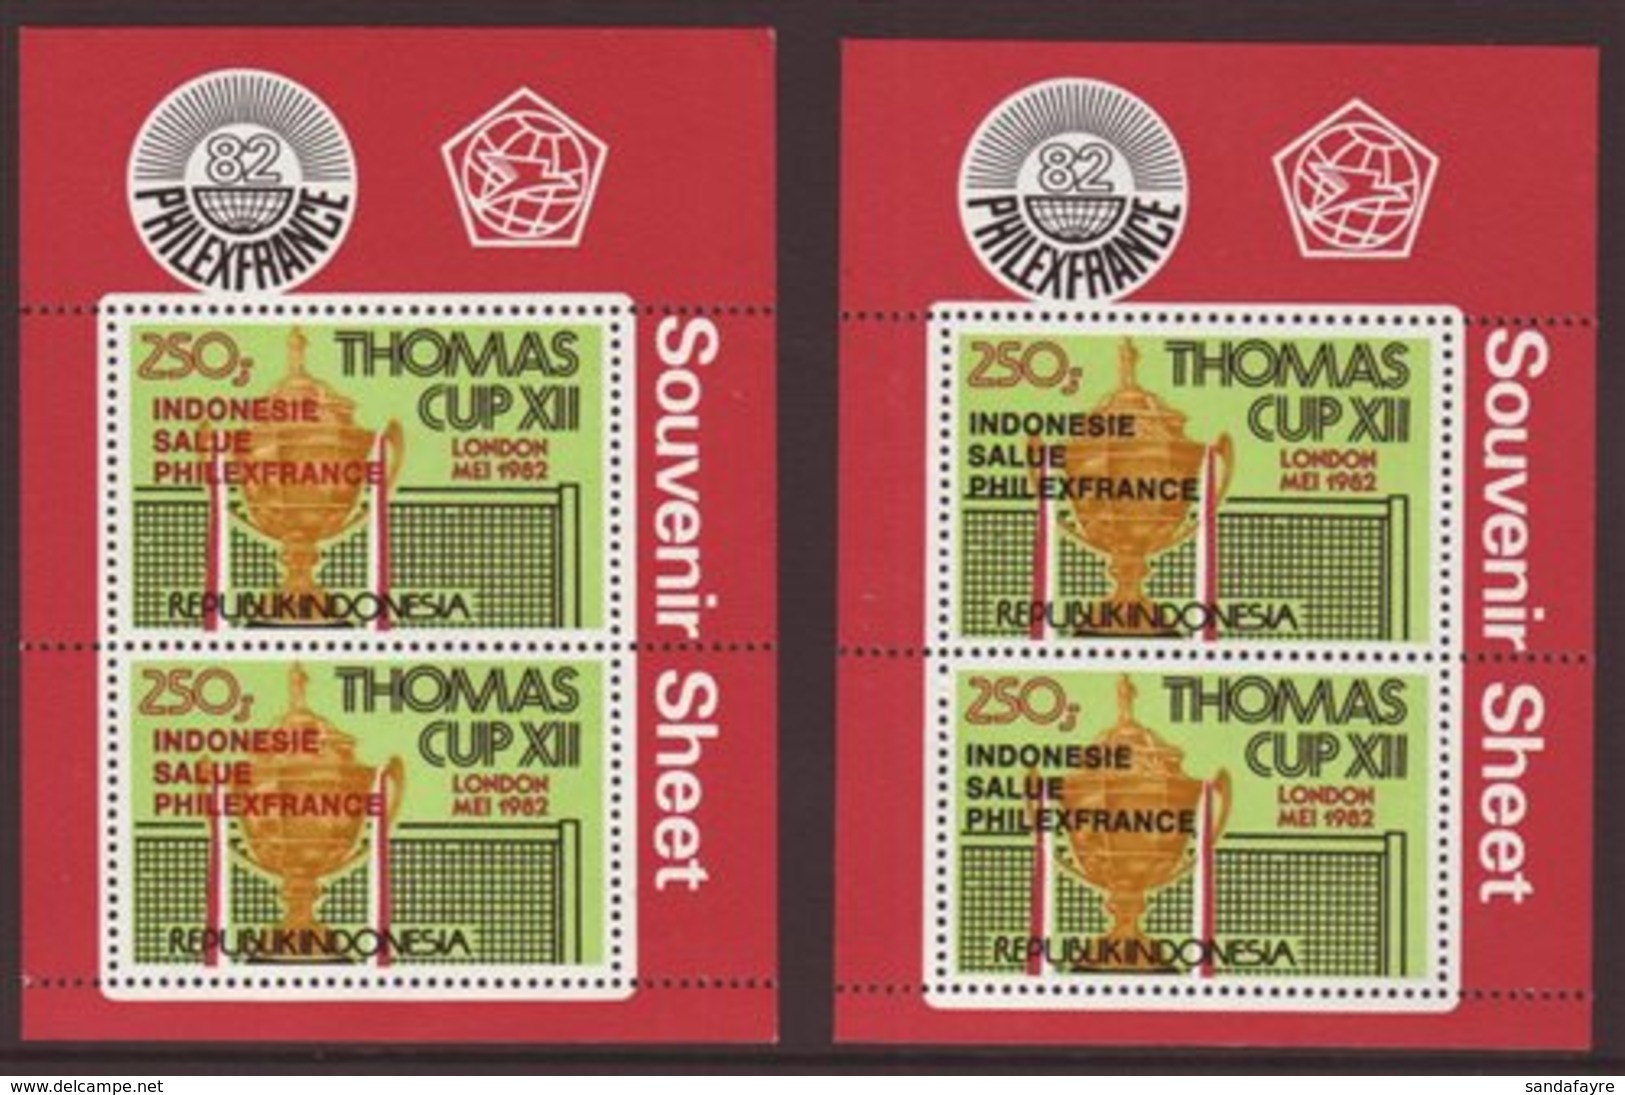 1982 Badminton Mini-sheets With "PHILEXFRANCE" Overprint In Red And In Black, See Notes After SG MS1673 Or Scott 1176a,  - Indonesië